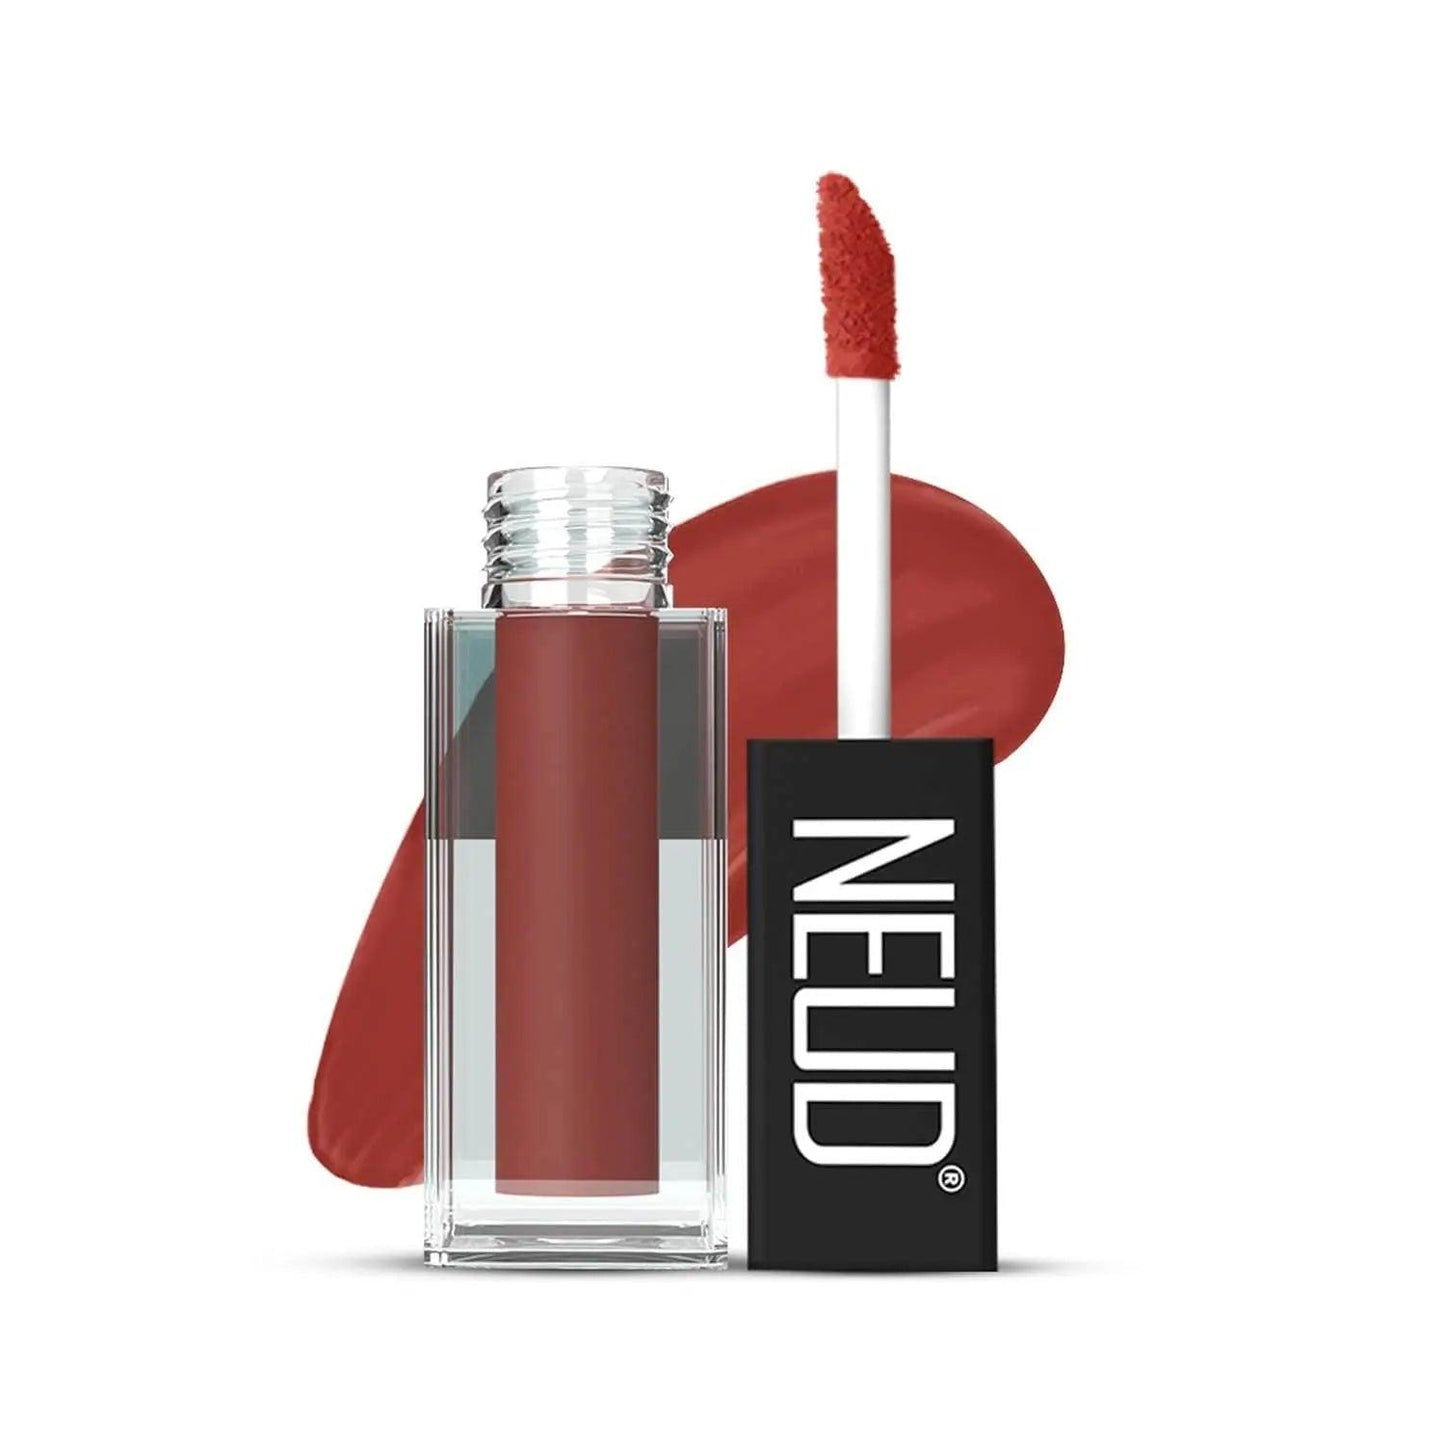 NEUD Matte Liquid Lipstick Jolly Coral with Jojoba Oil, Vitamin E and Almond Oil - Smudge Proof 12-hour Stay Formula with Free Lip Gloss